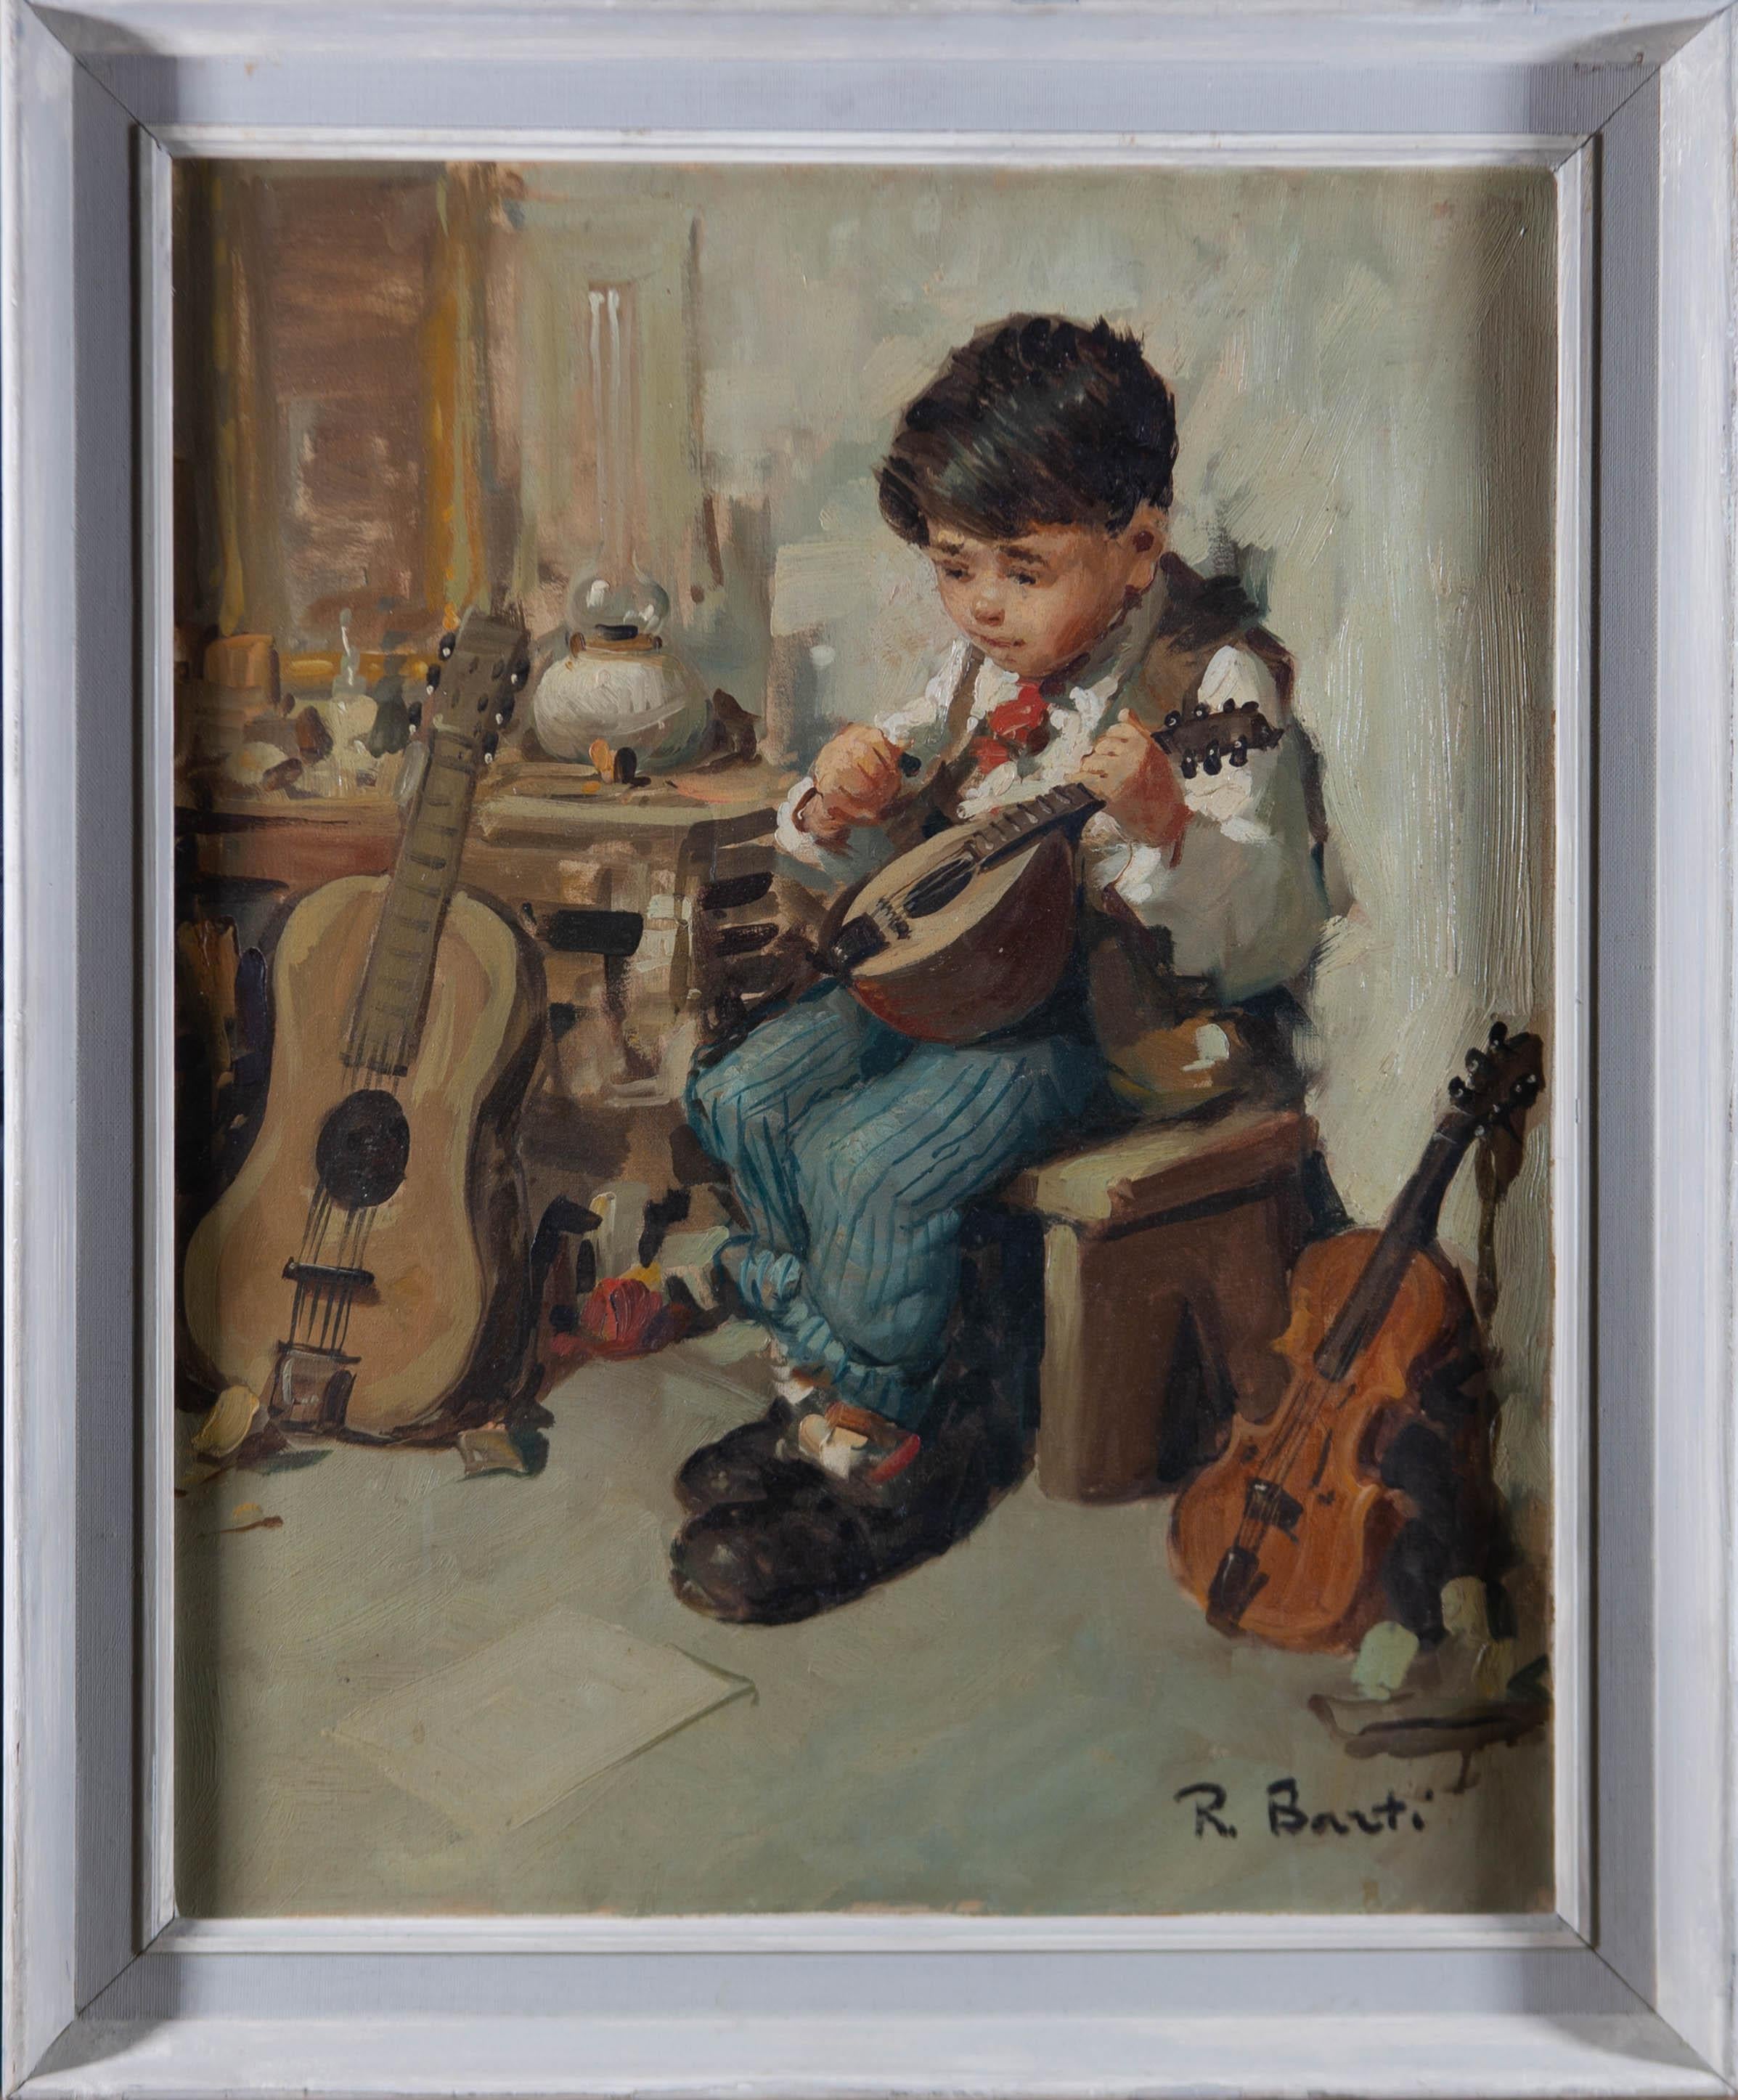 Soft impastos and a warm palette portray a wholesome image of a young boy and his mandolin. The artwork provides a heartwarming atmosphere and is well presented in a distressed white wood frame with a linen slip. Signed in the bottom right-hand